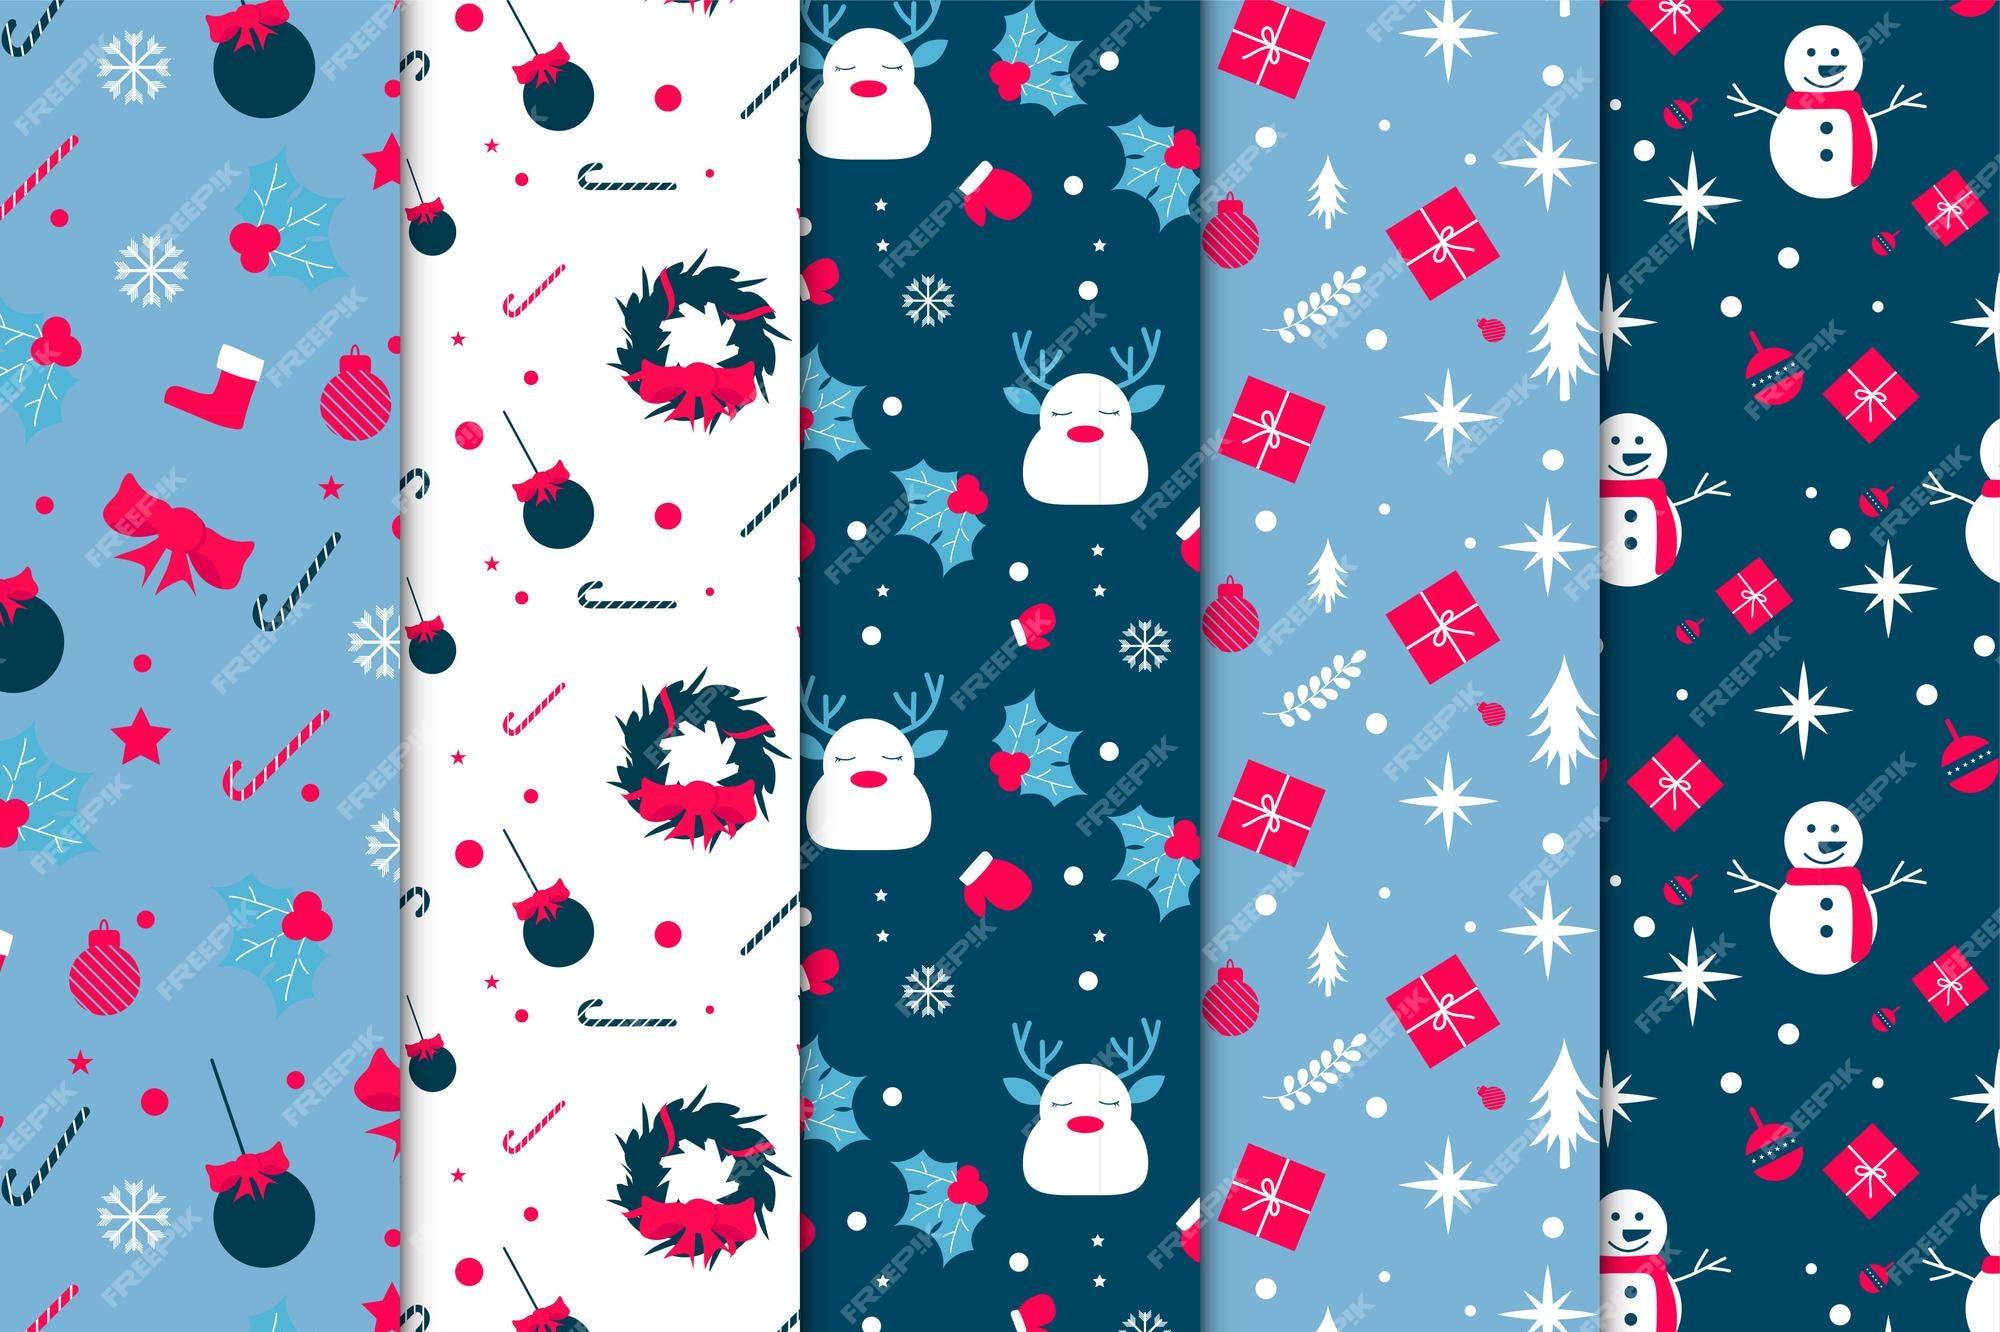 Premium Vector Christmas Decoration Pattern Bundle With Blue And